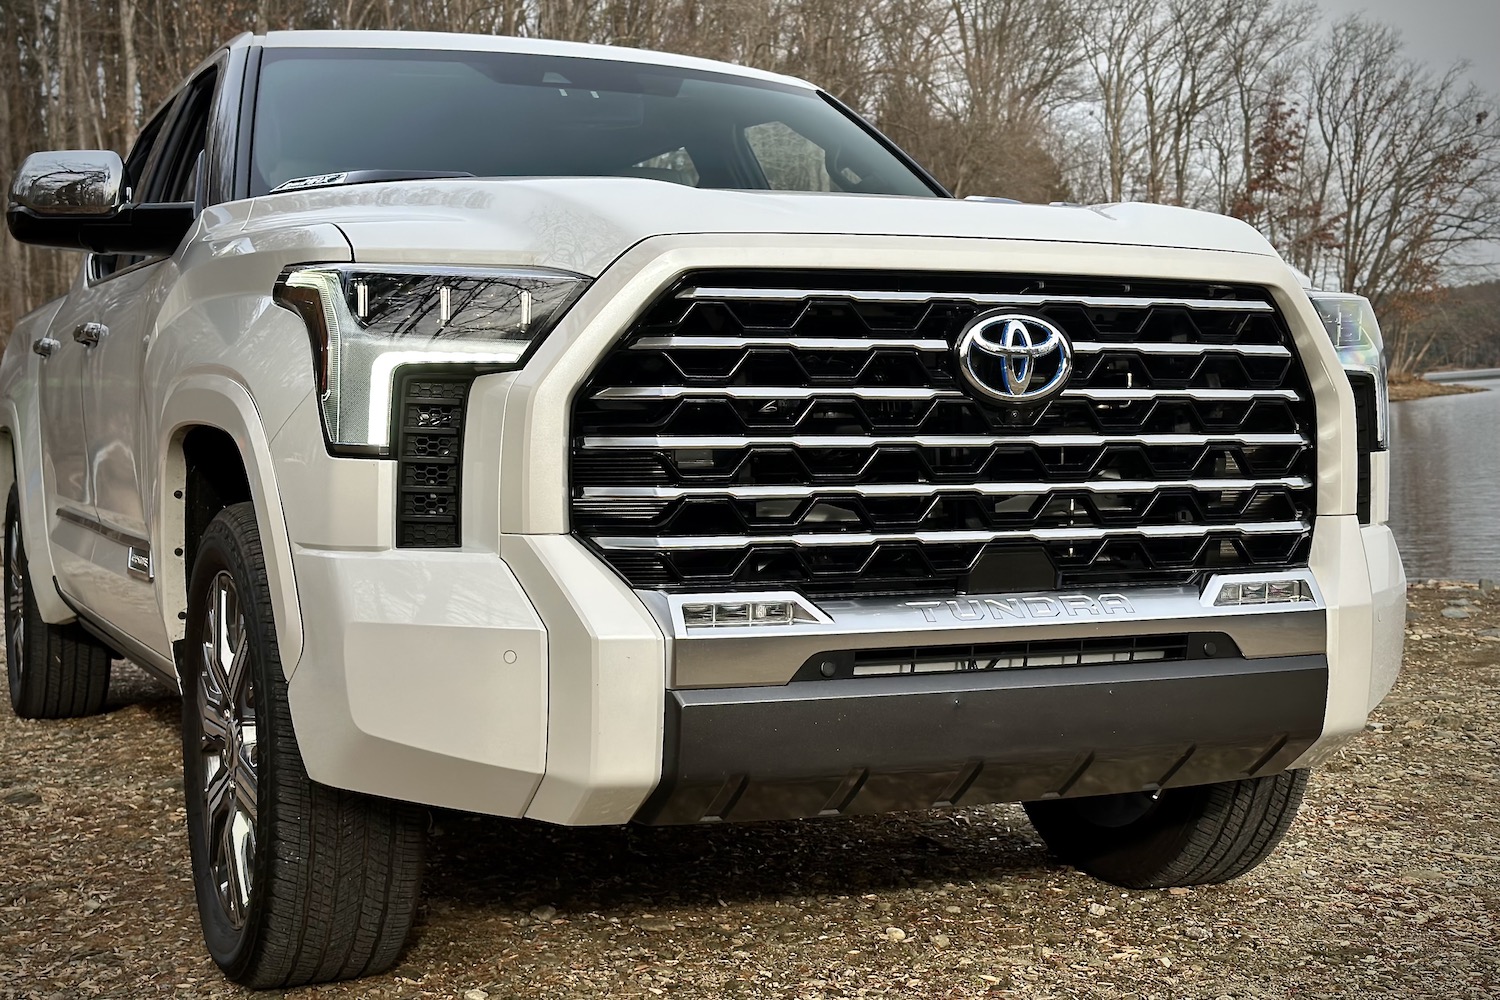 Close up of front grille on 2022 Toyota Tundra Hybrid Capstone parked on dirt with trees in the back.